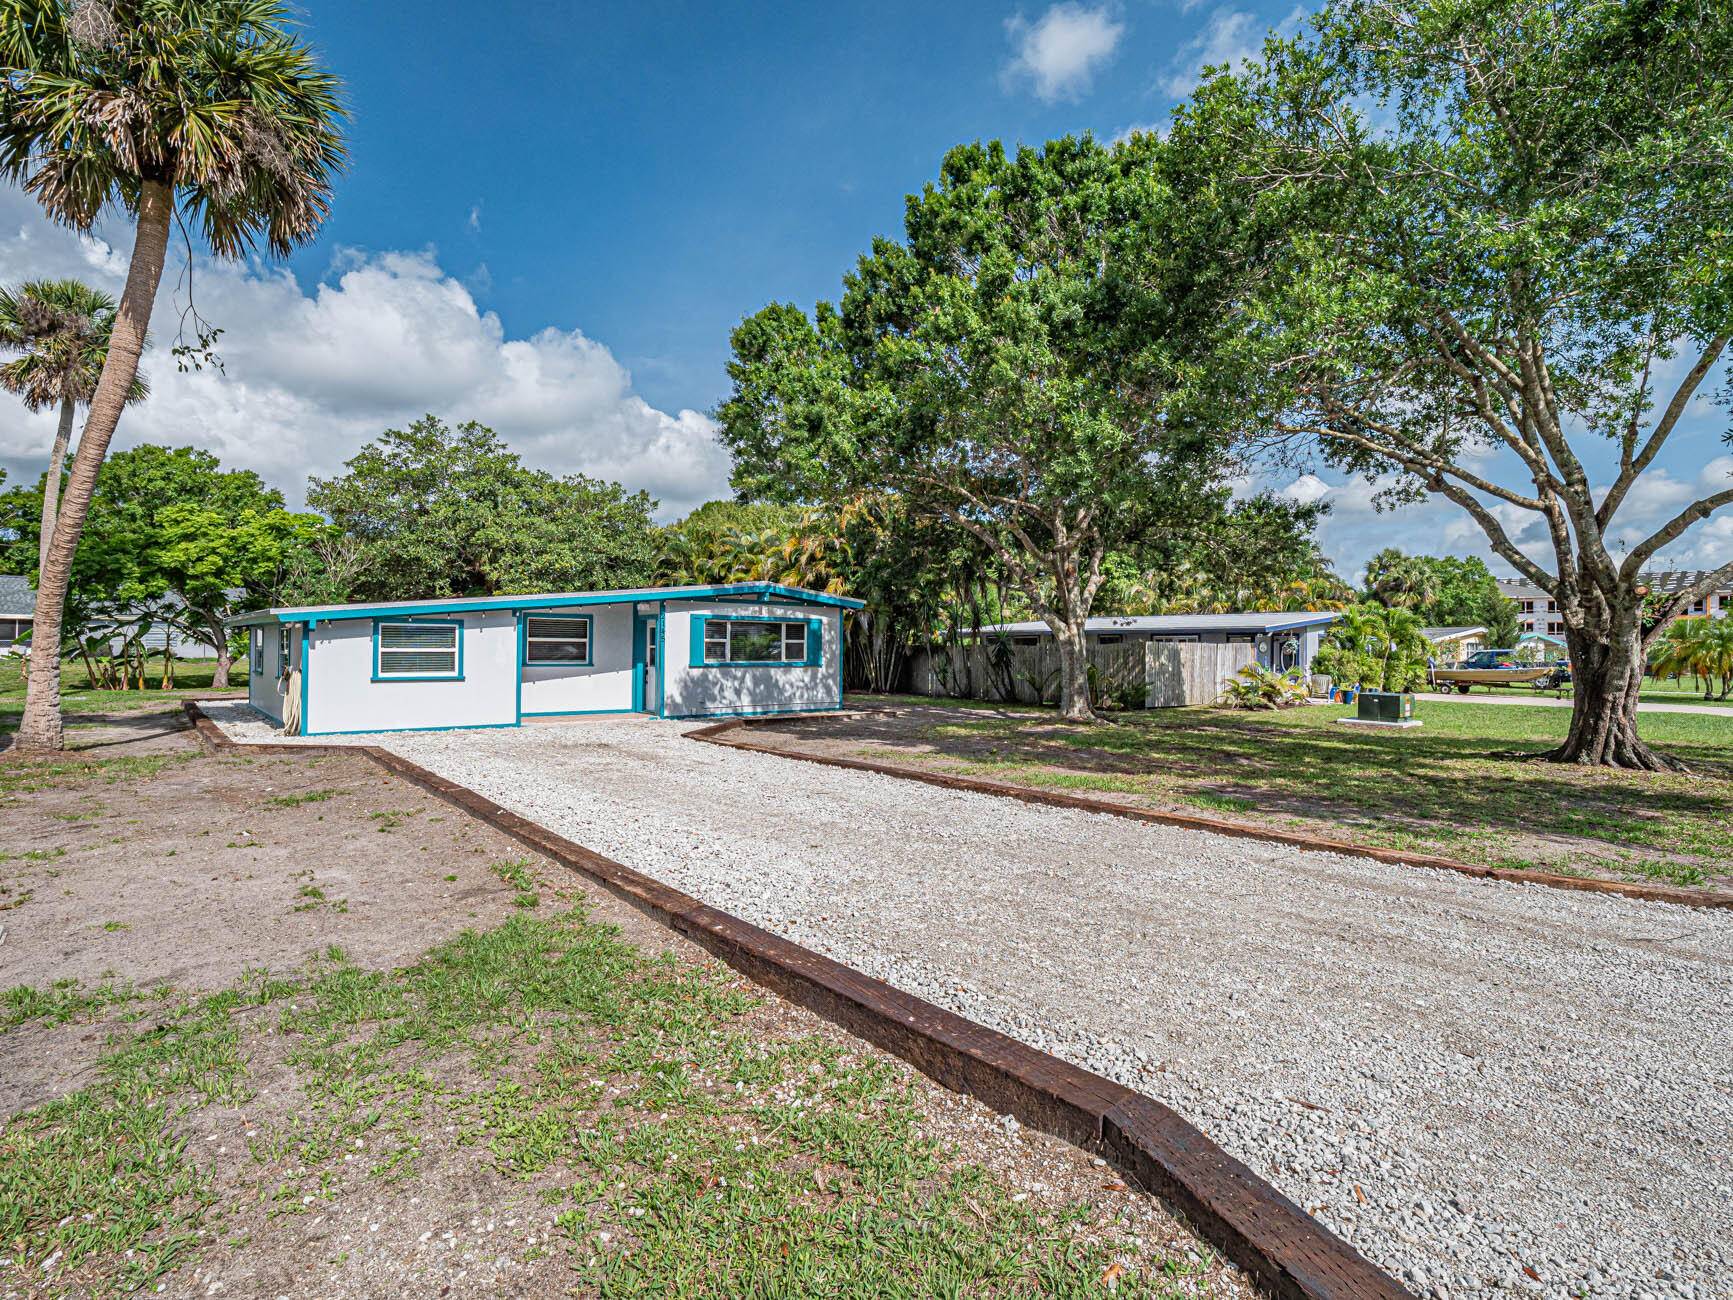 You must see this recently updated 2BR 1BA CBS home off a quiet side street in Vero Beach neighborhood of Westgate Colony.